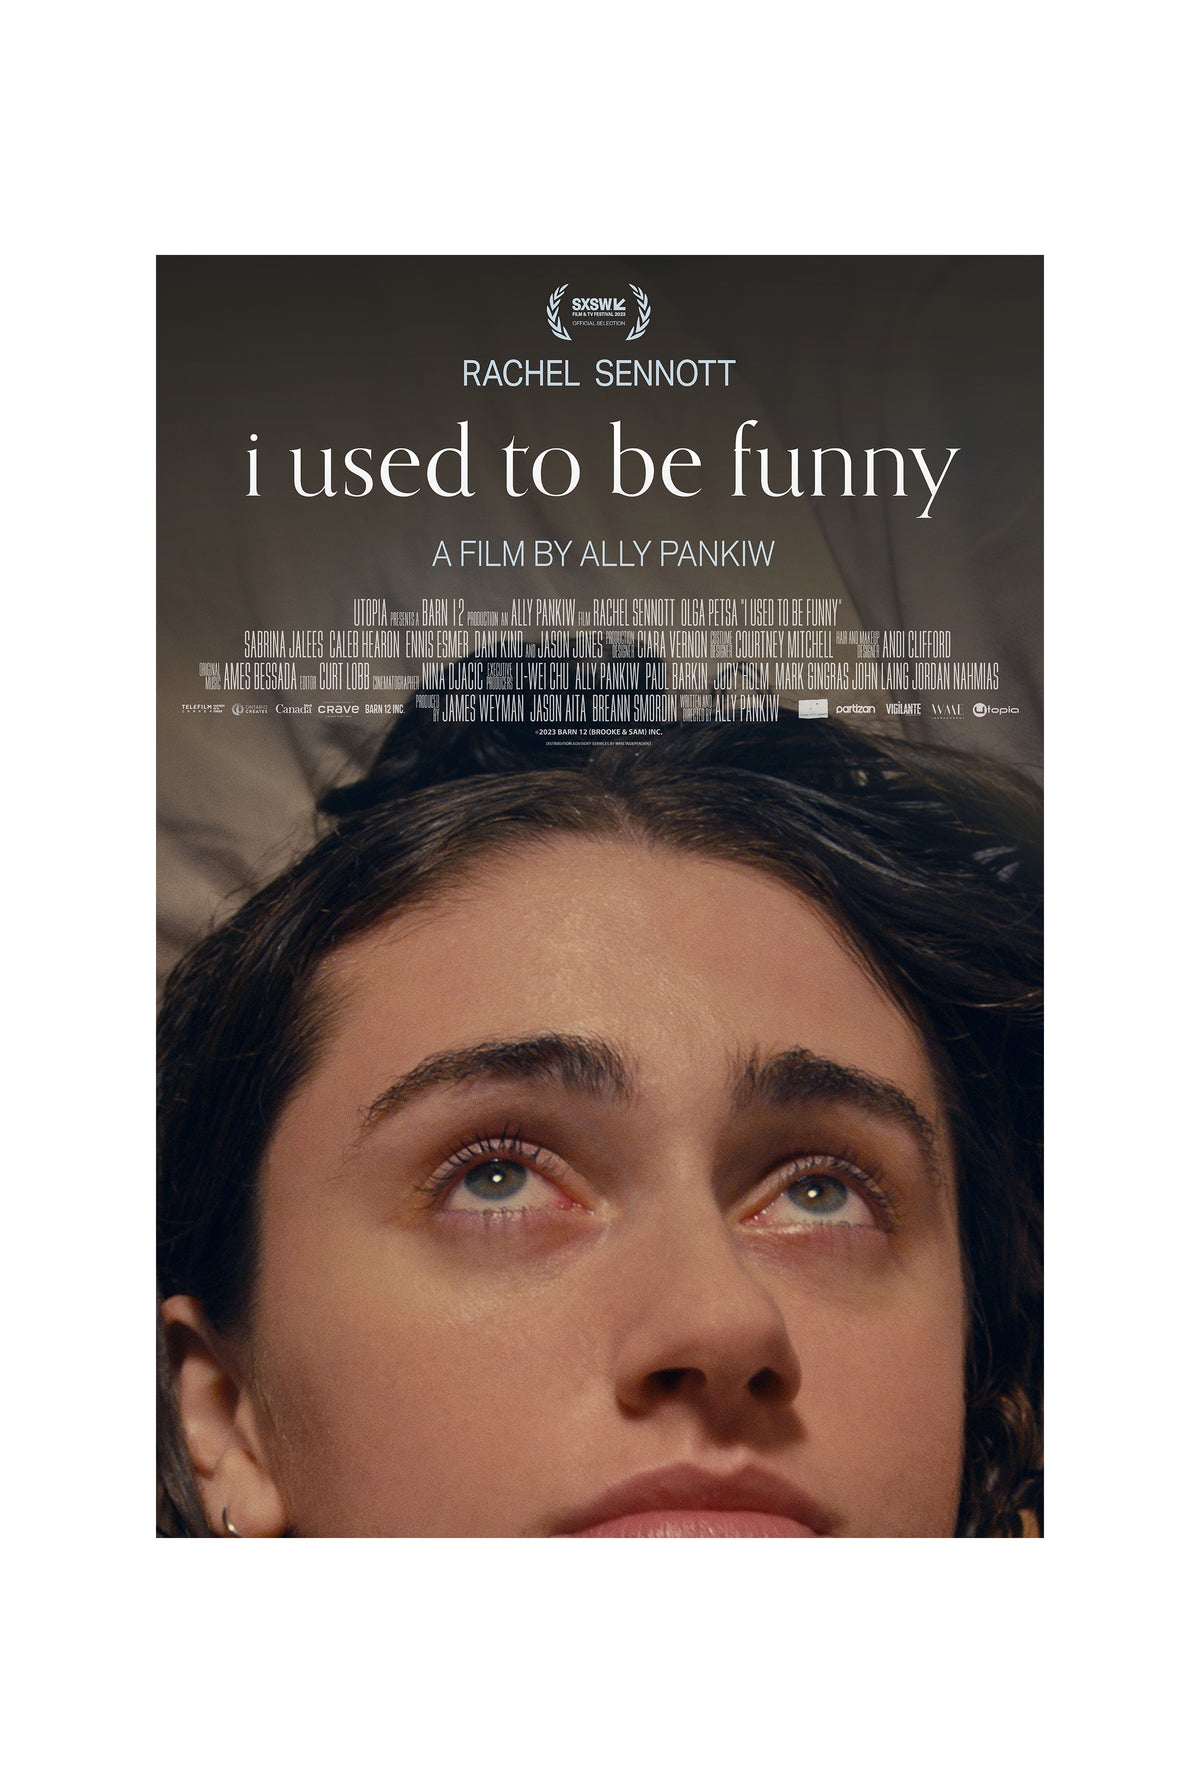 I Used to be Funny (Official Theatrical Poster)